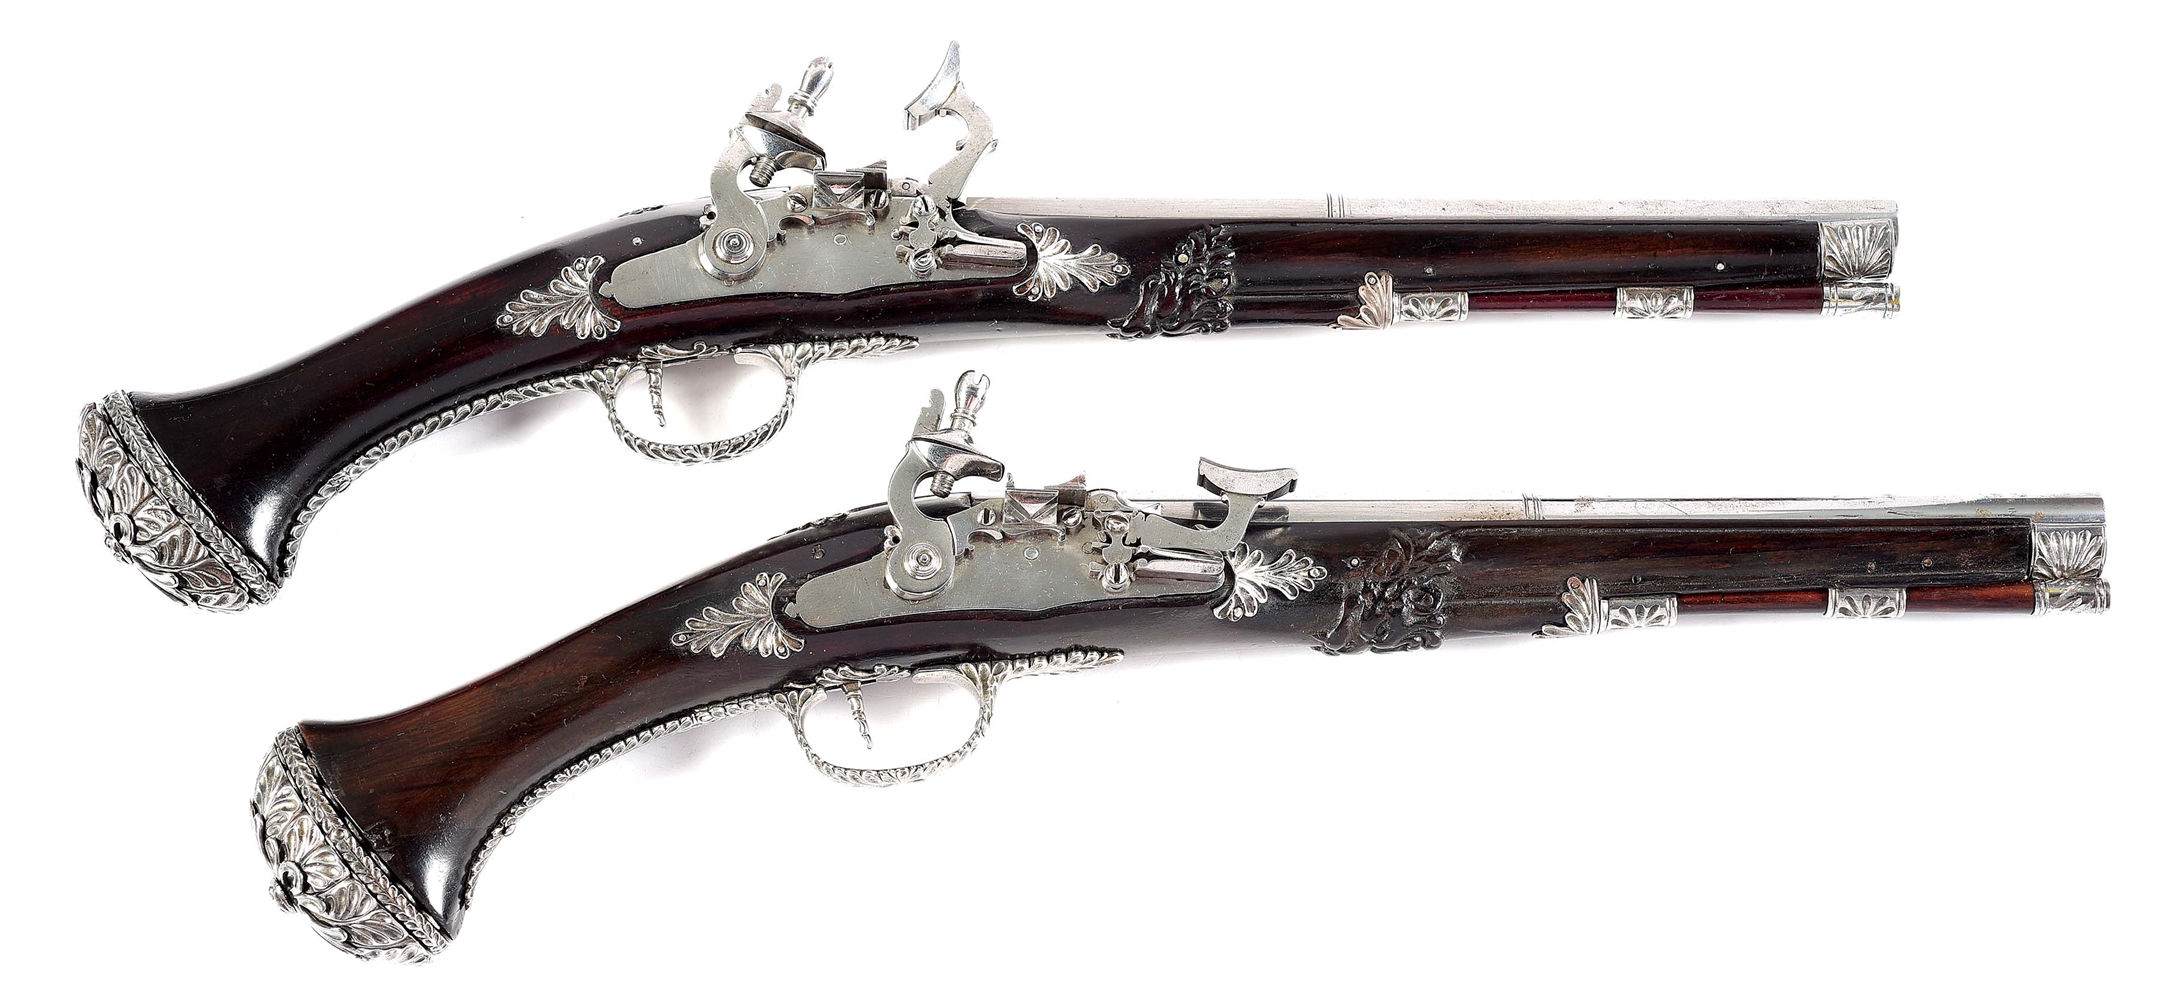 (A) SNAPHAUNCE PISTOLS WITH ORNATE MOUNTINGS IN THE STYLE OF 17TH CENTURY SWISS, EX. W.G. RENWICK.